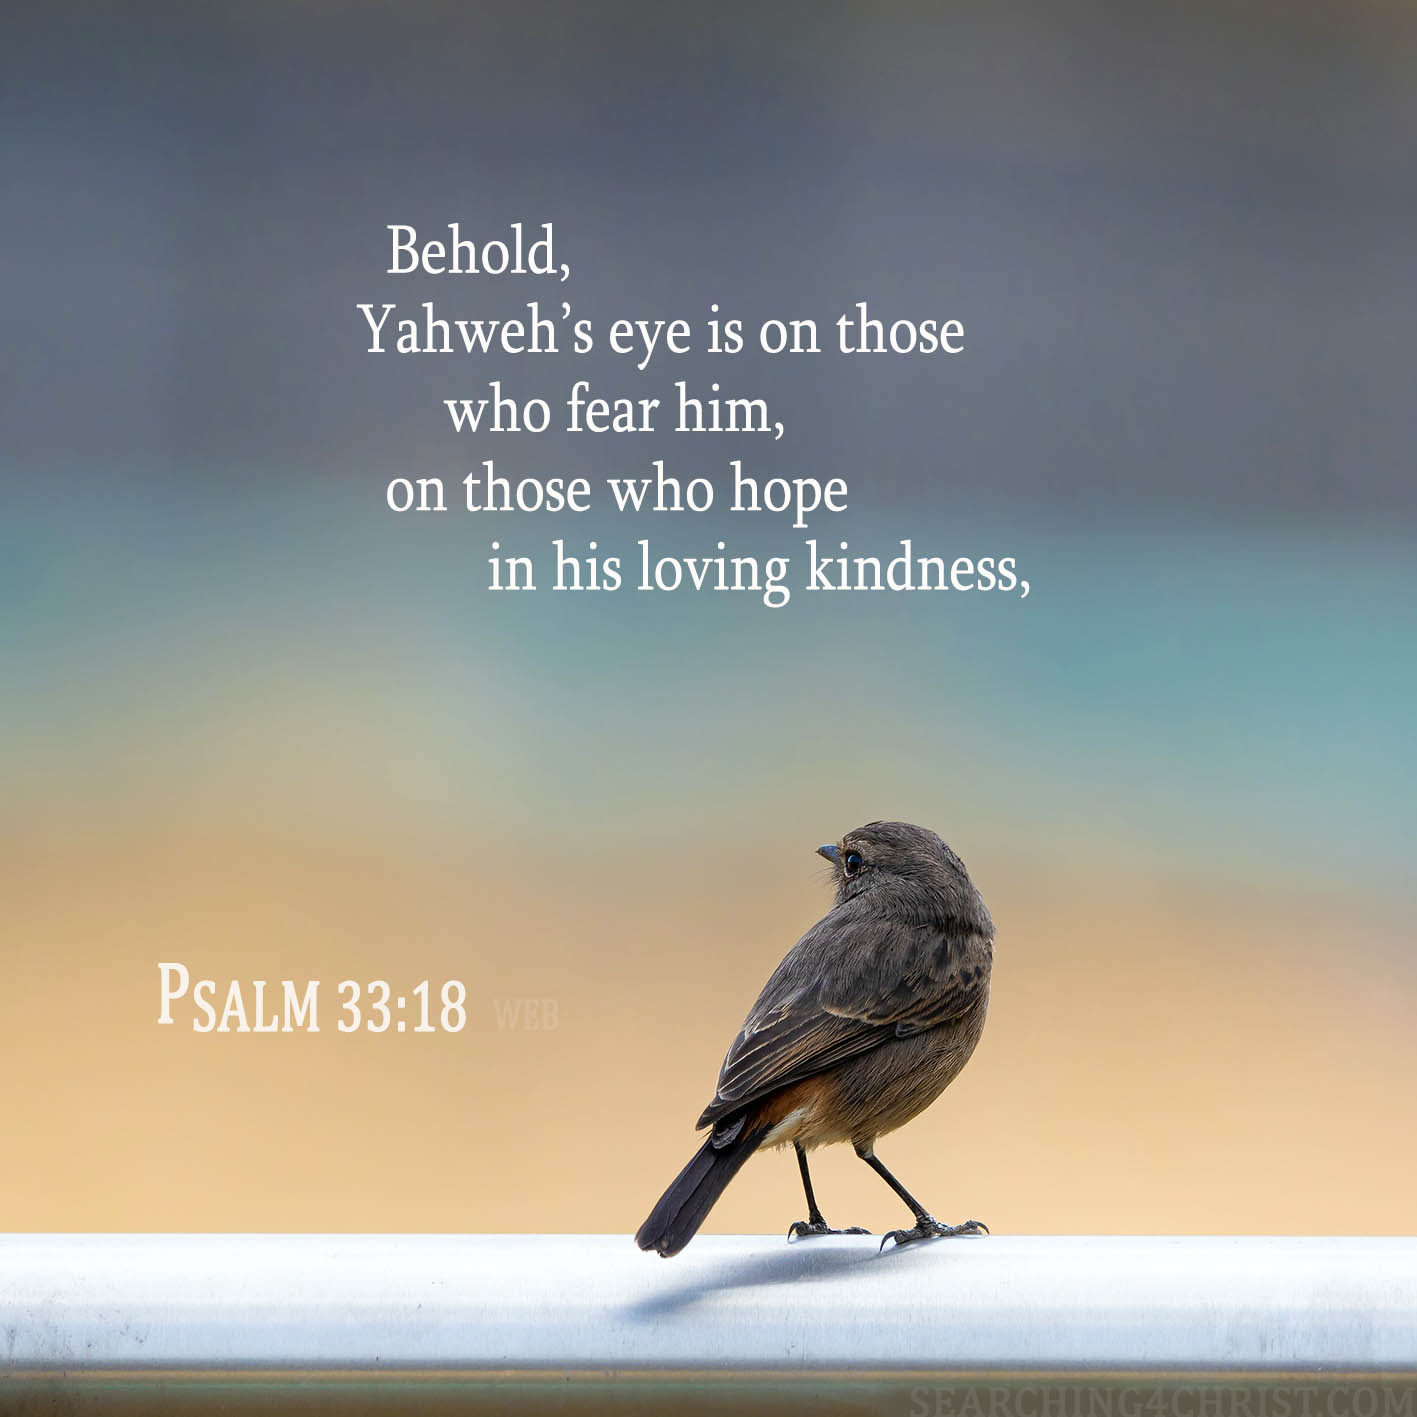 Behold, Yahweh’s eye is on those who fear him, on those who hope in his loving kindness, Psalm 33:18